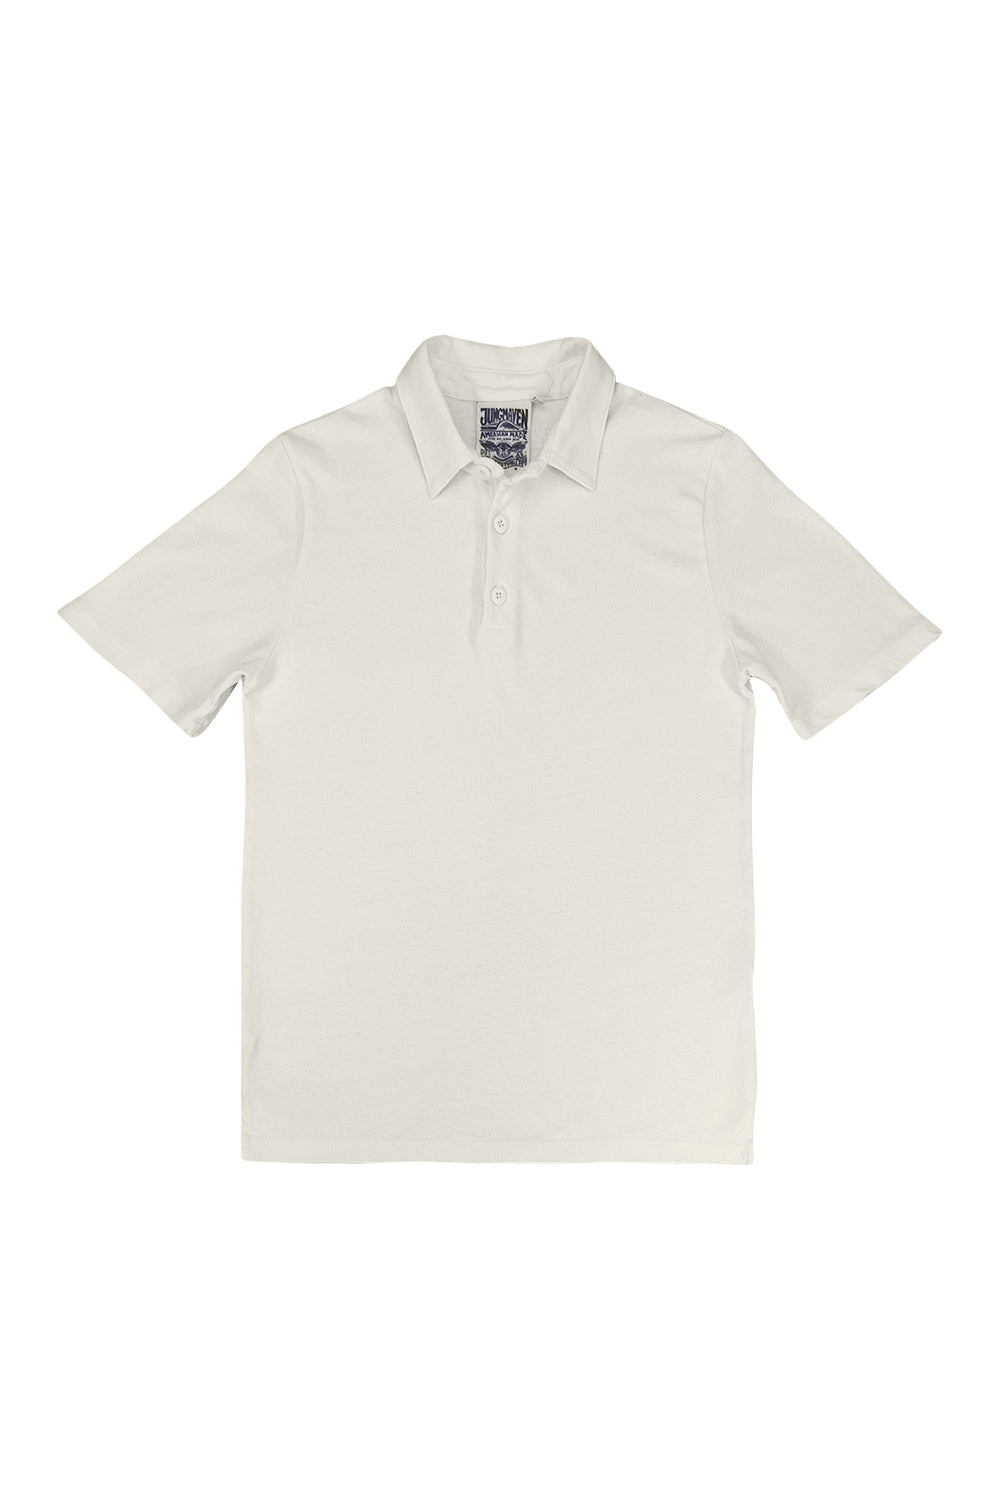 Preston Polo Shirt | Jungmaven Hemp Clothing & Accessories / Color: Washed White